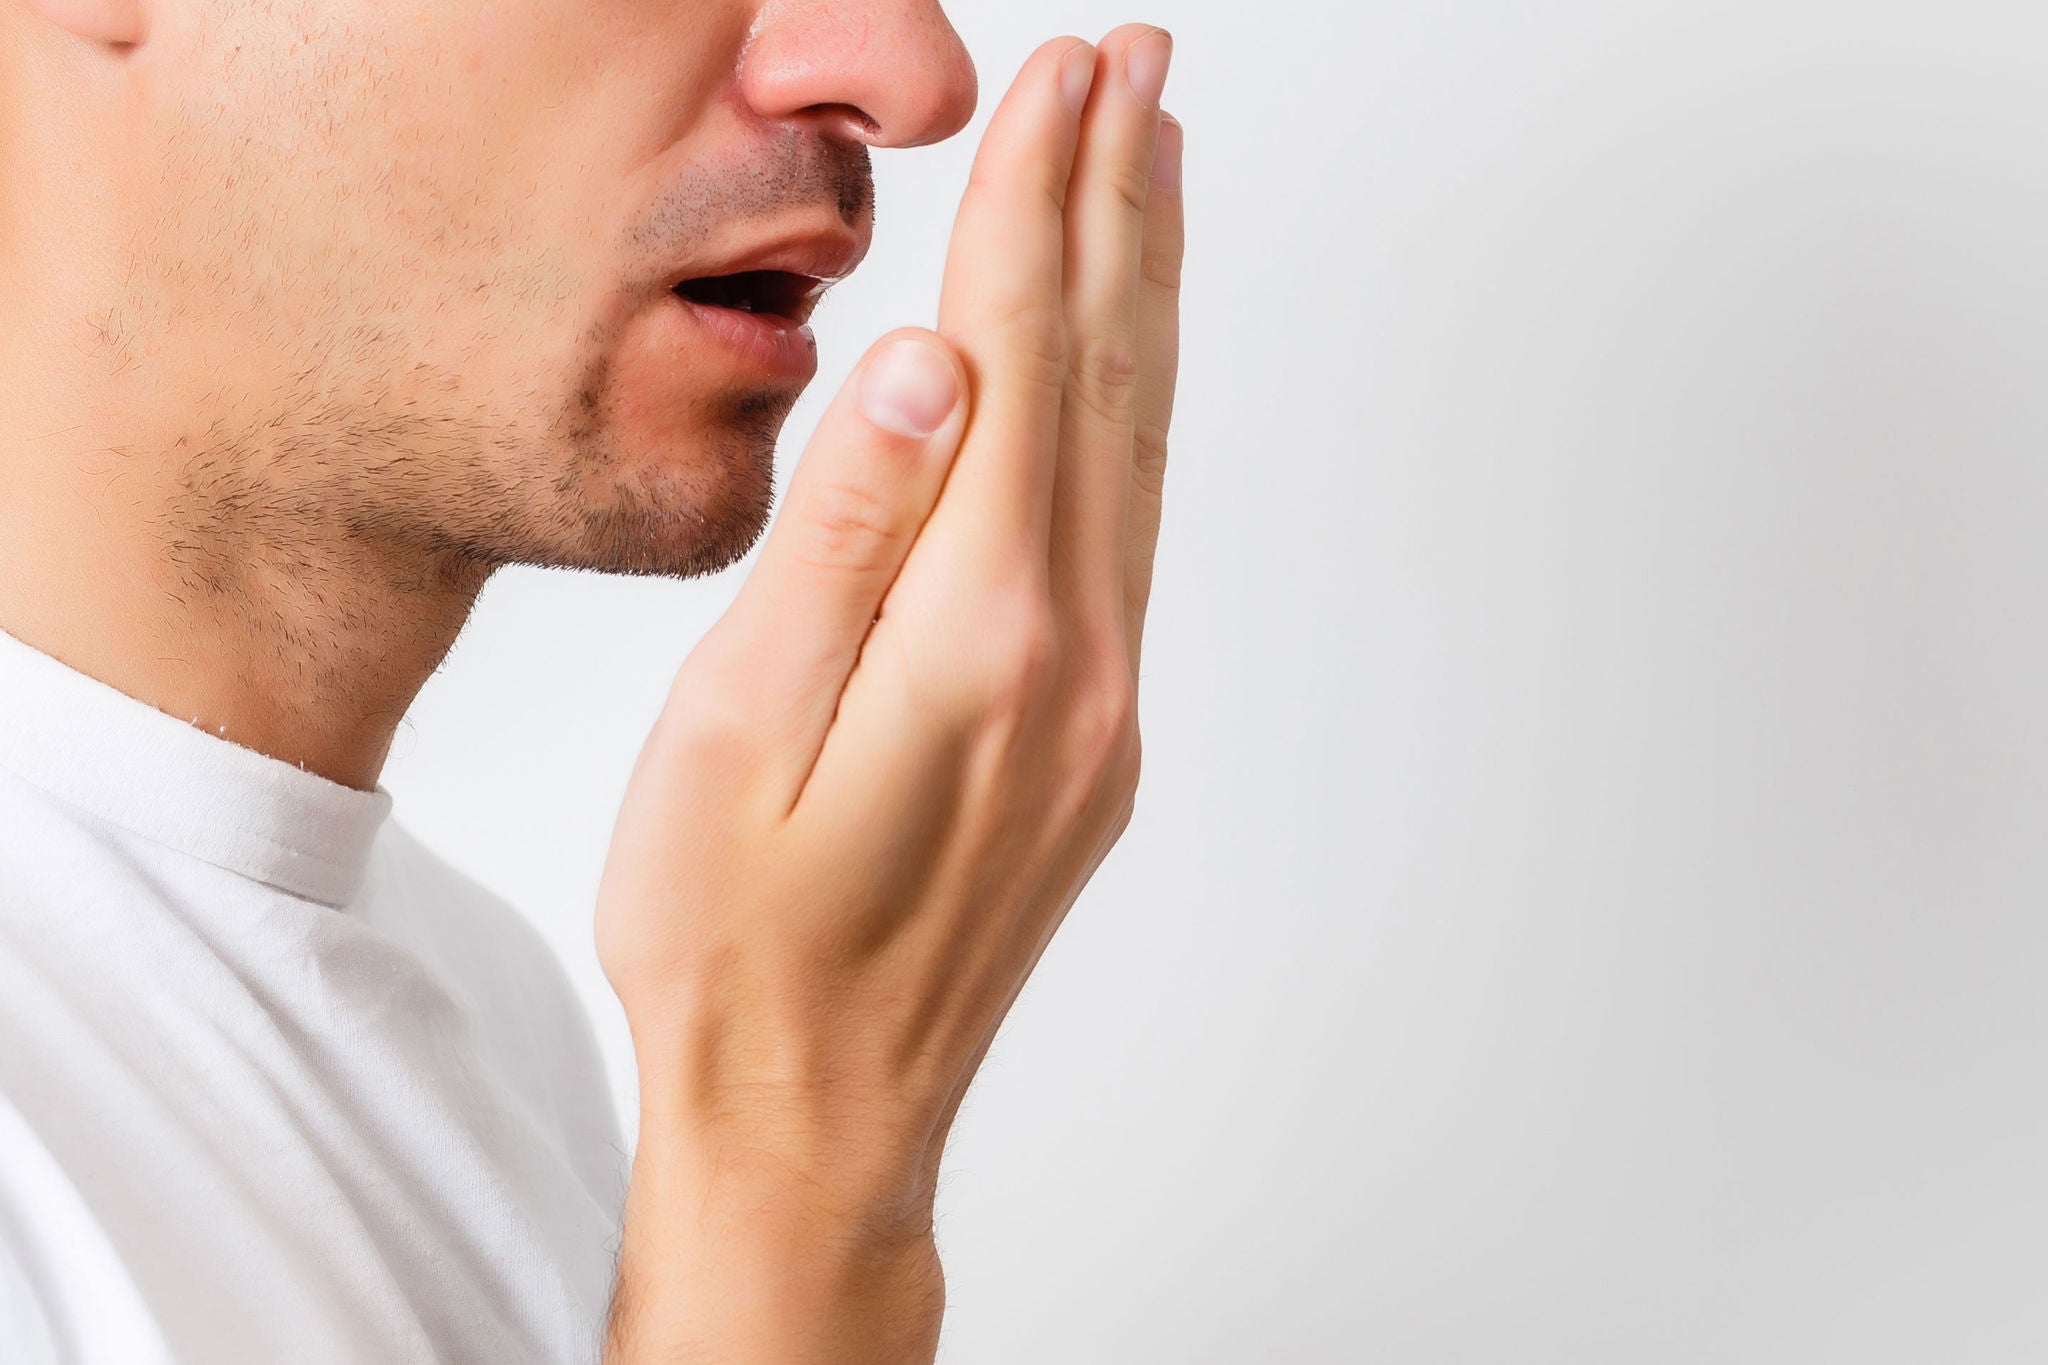 Therapeutic Methods for Halitosis